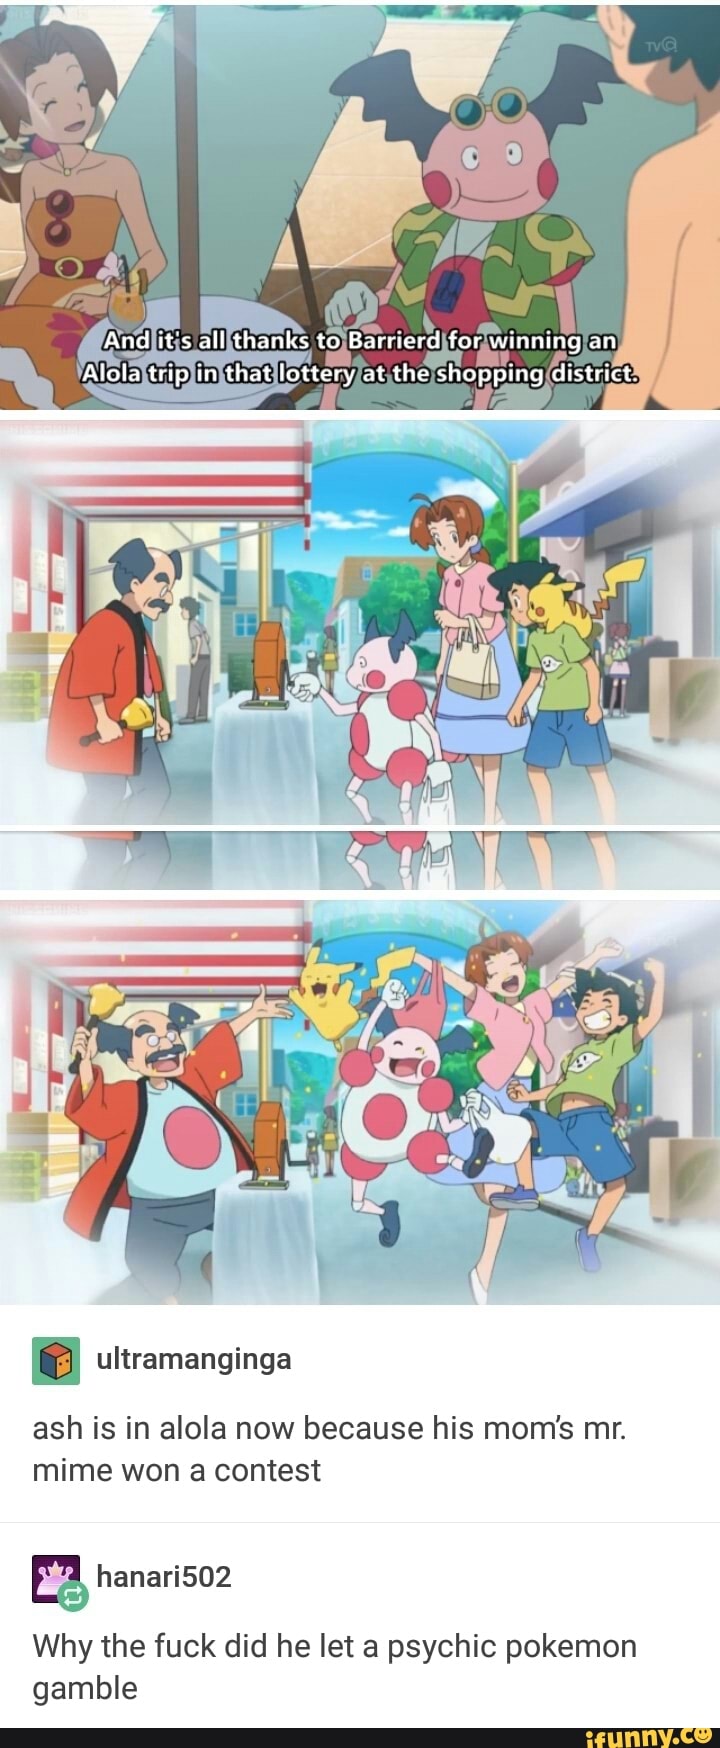 ash is in alola now because his mom's mr. Prev. 